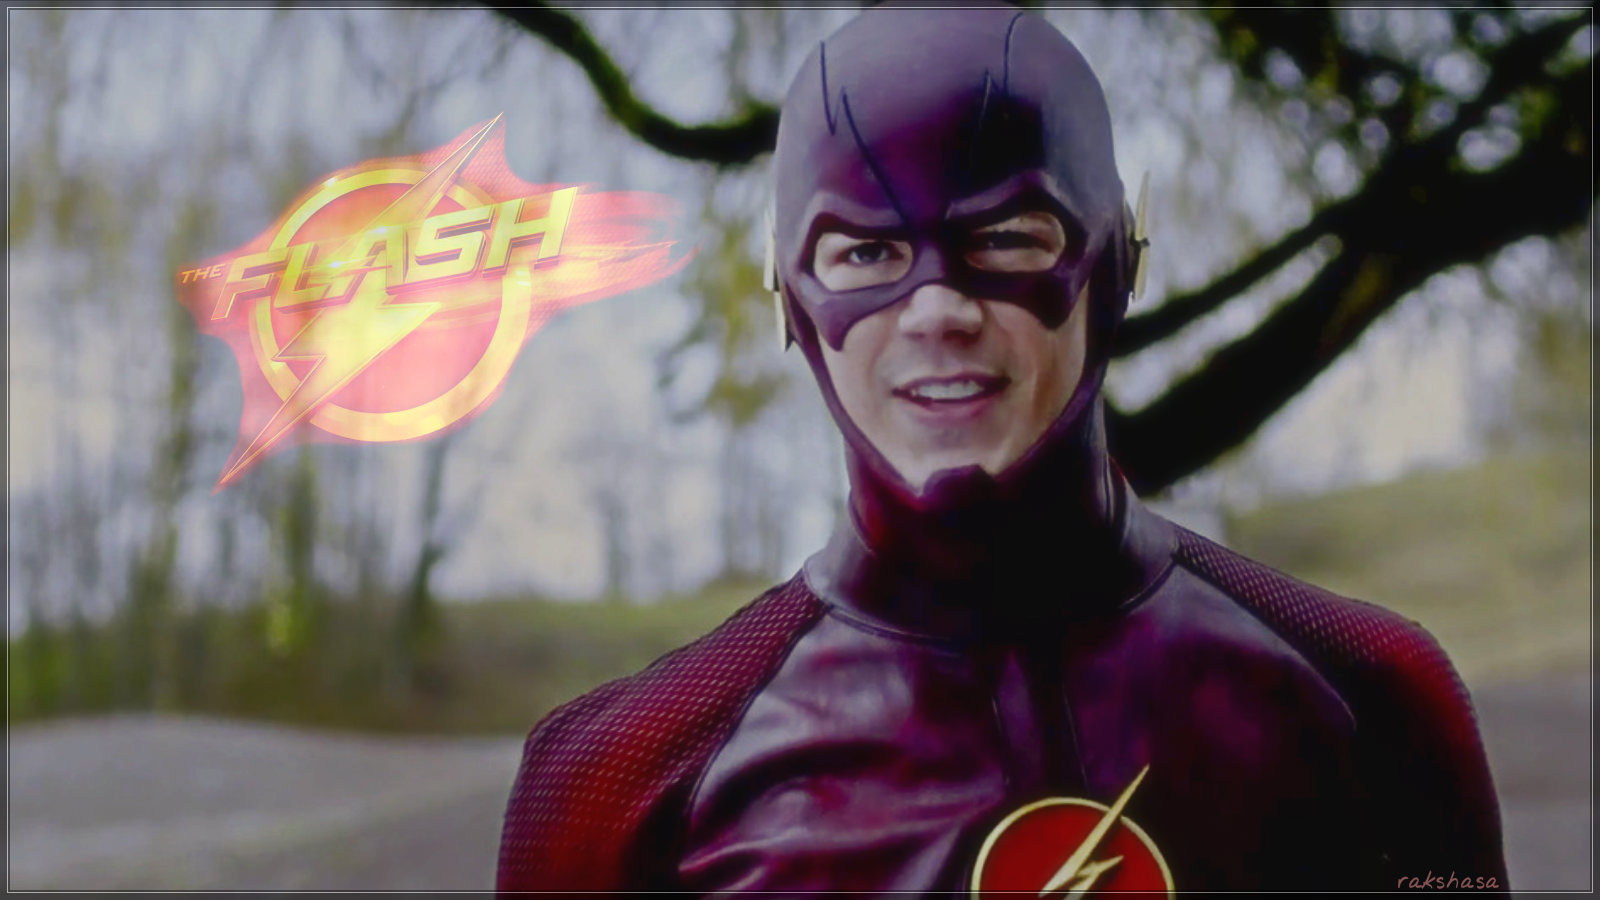 The Flash - Moving Wallpaper Of The Flash - HD Wallpaper 